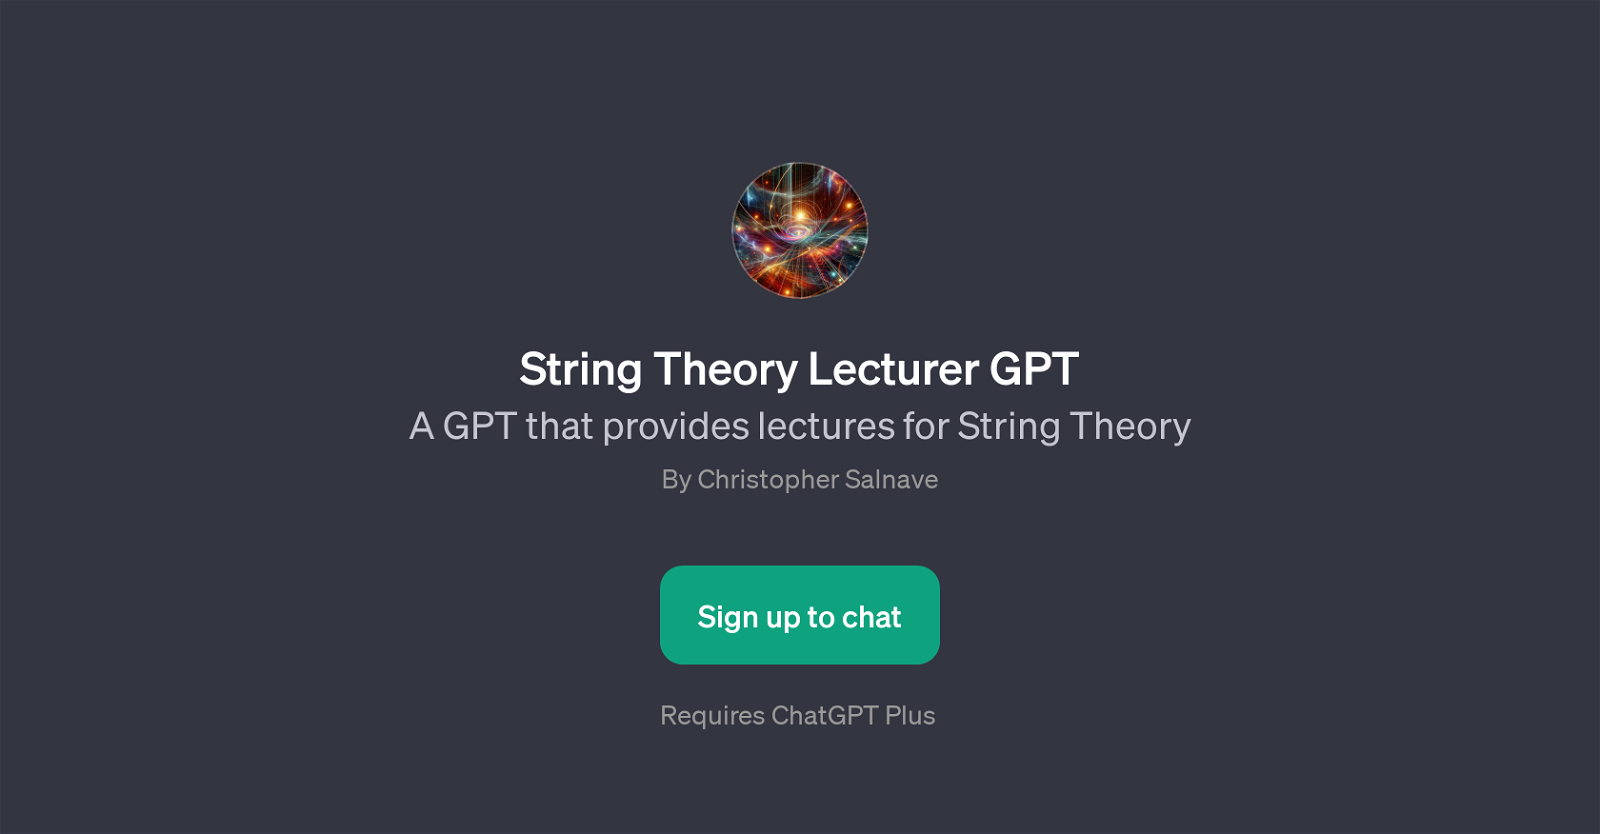 String Theory Lecturer GPT website